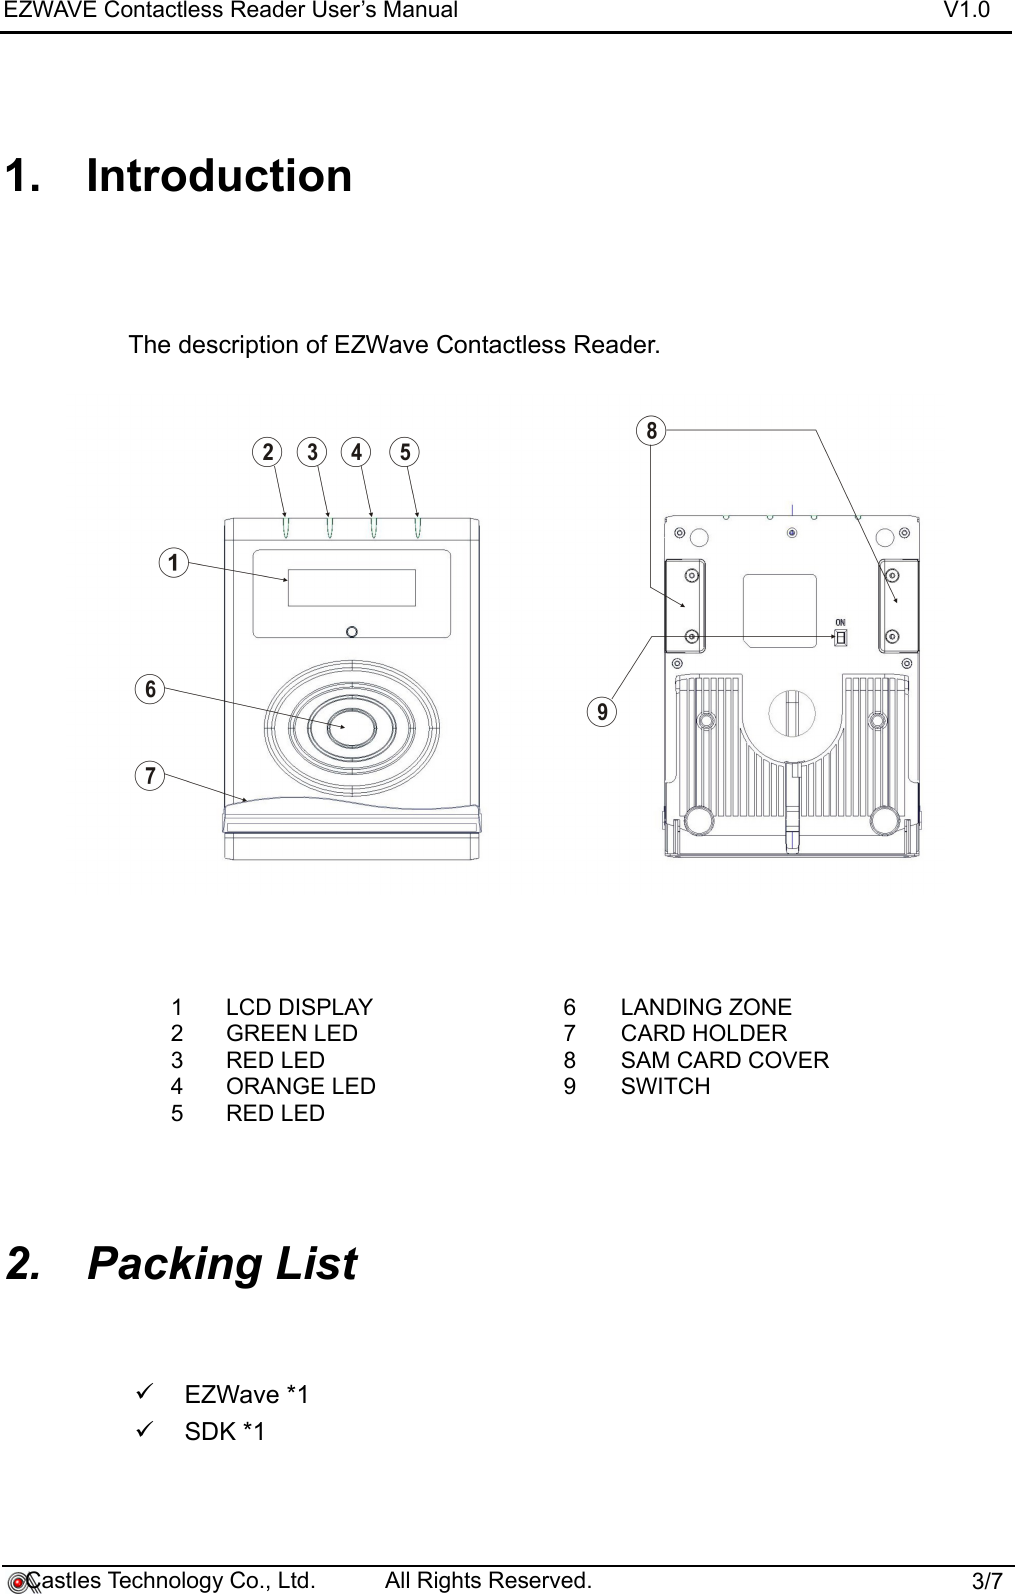 EZWAVE Contactless Reader User’s Manual V1.01. IntroductionThe description of EZWave Contactless Reader.1 LCD DISPLAY 6 LANDING ZONE2 GREEN LED 7 CARD HOLDER3 RED LED 8 SAM CARD COVER4 ORANGE LED 9 SWITCH 5 RED LED2. Packing ListEZWave *1SDK *1    Castles Technology Co., Ltd.           All Rights Reserved.                          3/7